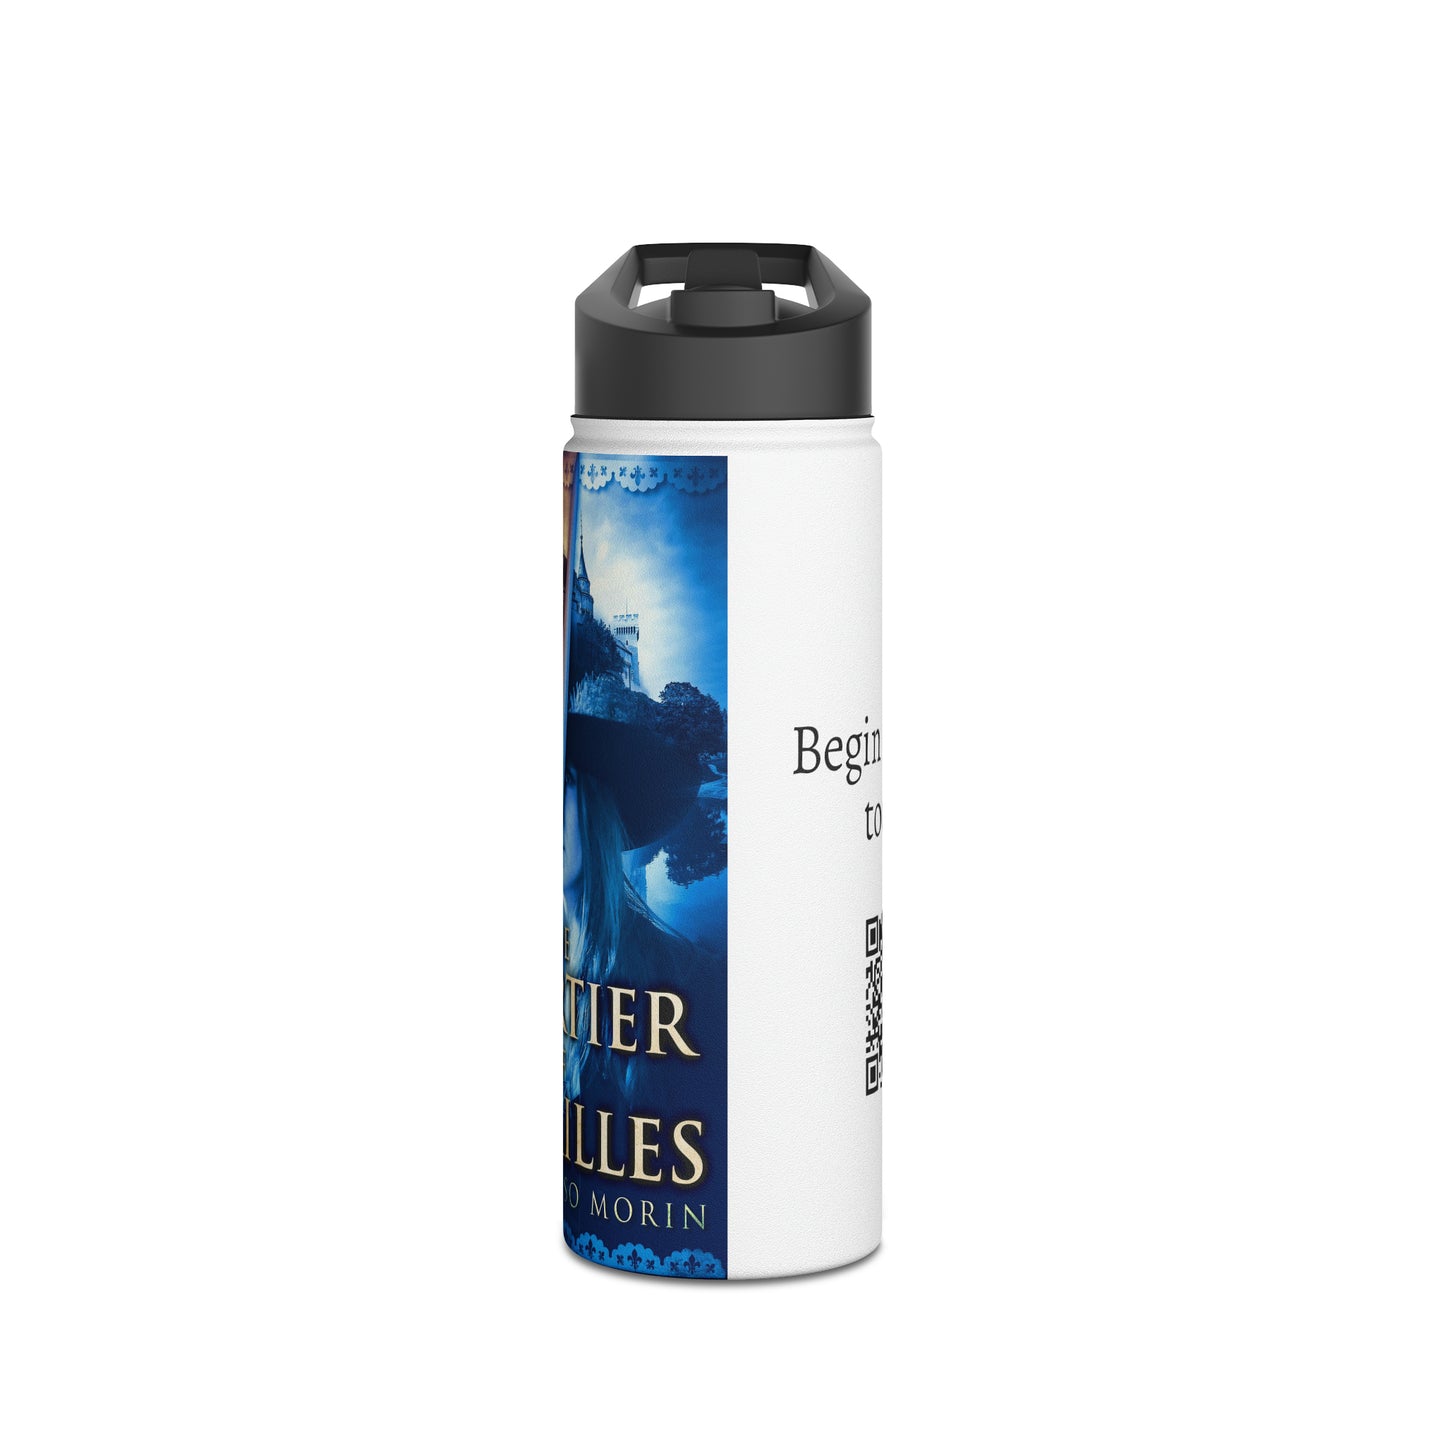 The Courtier of Versailles - Stainless Steel Water Bottle